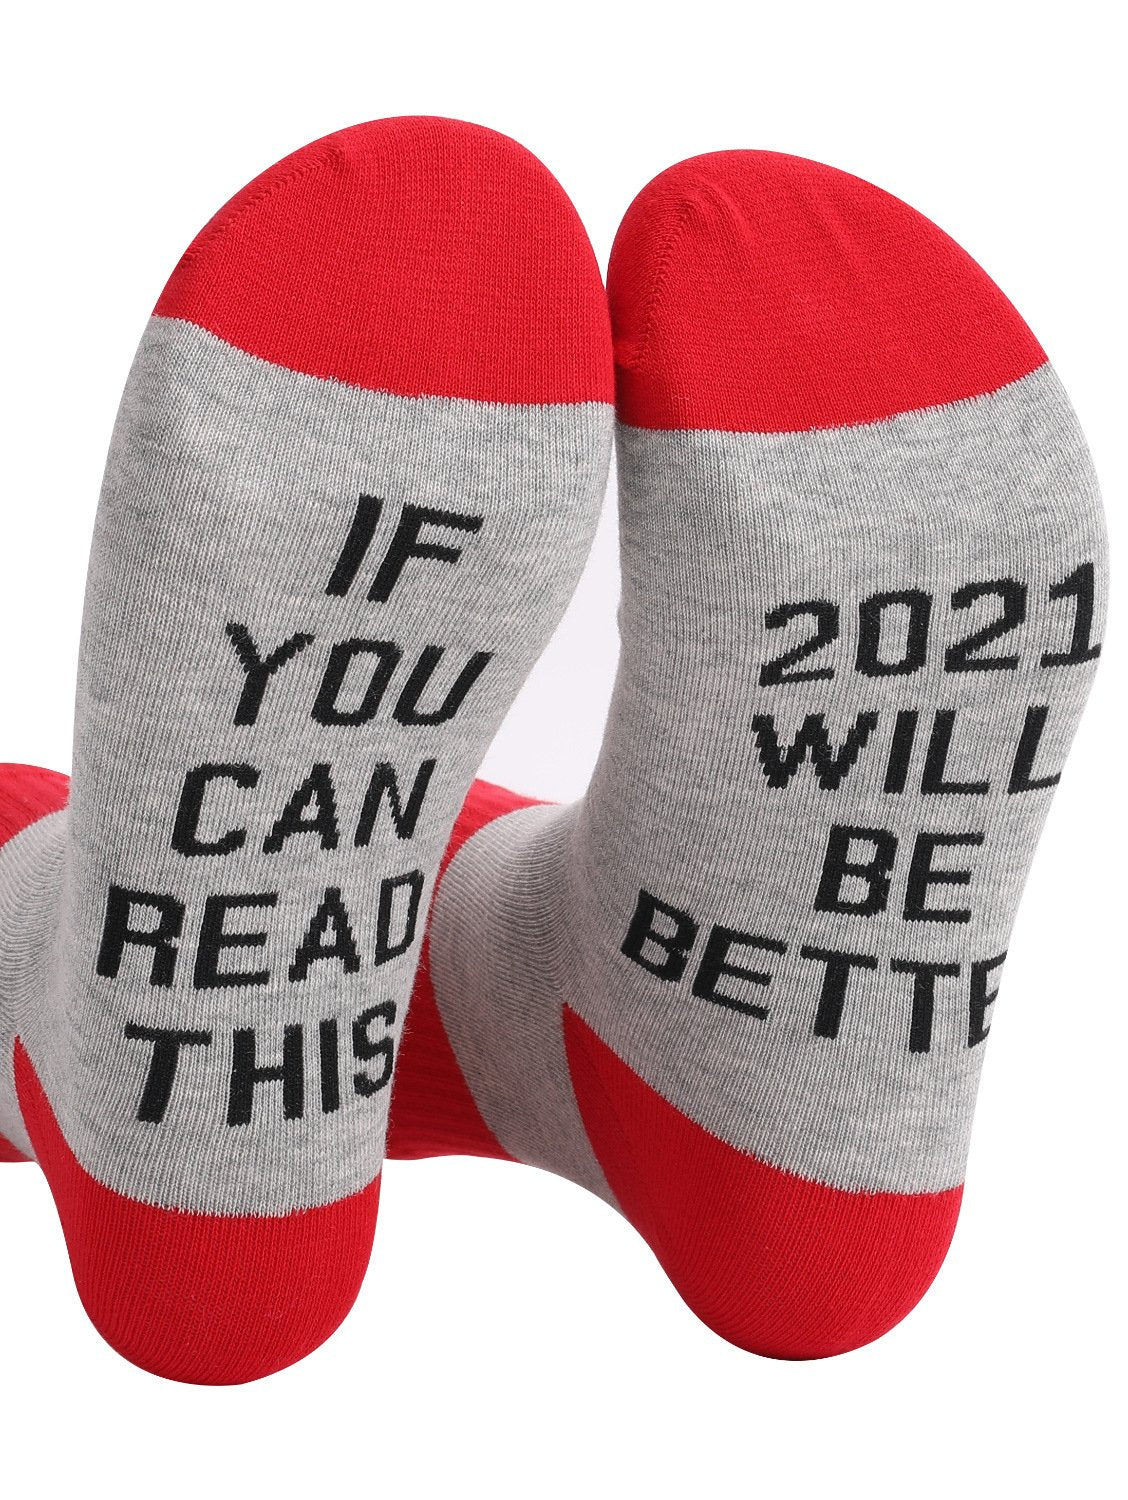 If You Can Read This 2021 Will Be Better Socks